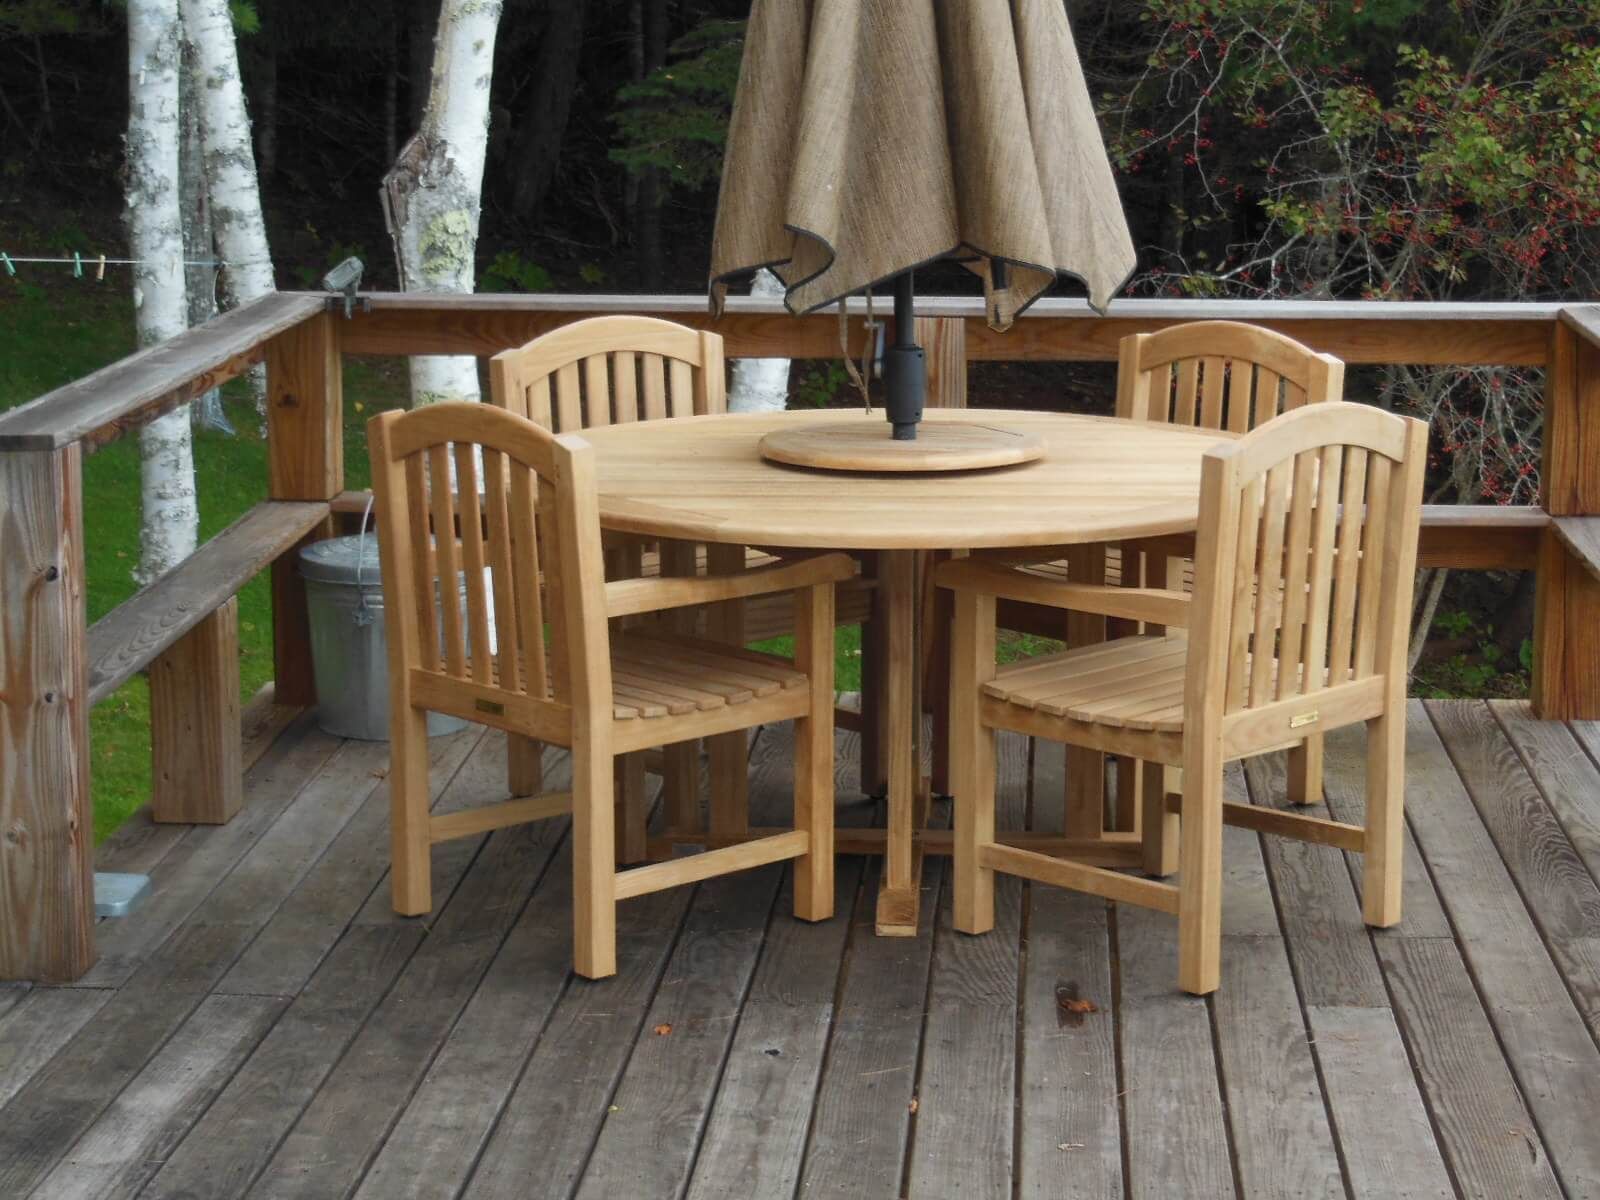 Teak Dia 48" Padua Round Dining Table, Buy Outdoor Patio Furniture In Teak Armchair Round Patio Dining Sets (View 15 of 15)